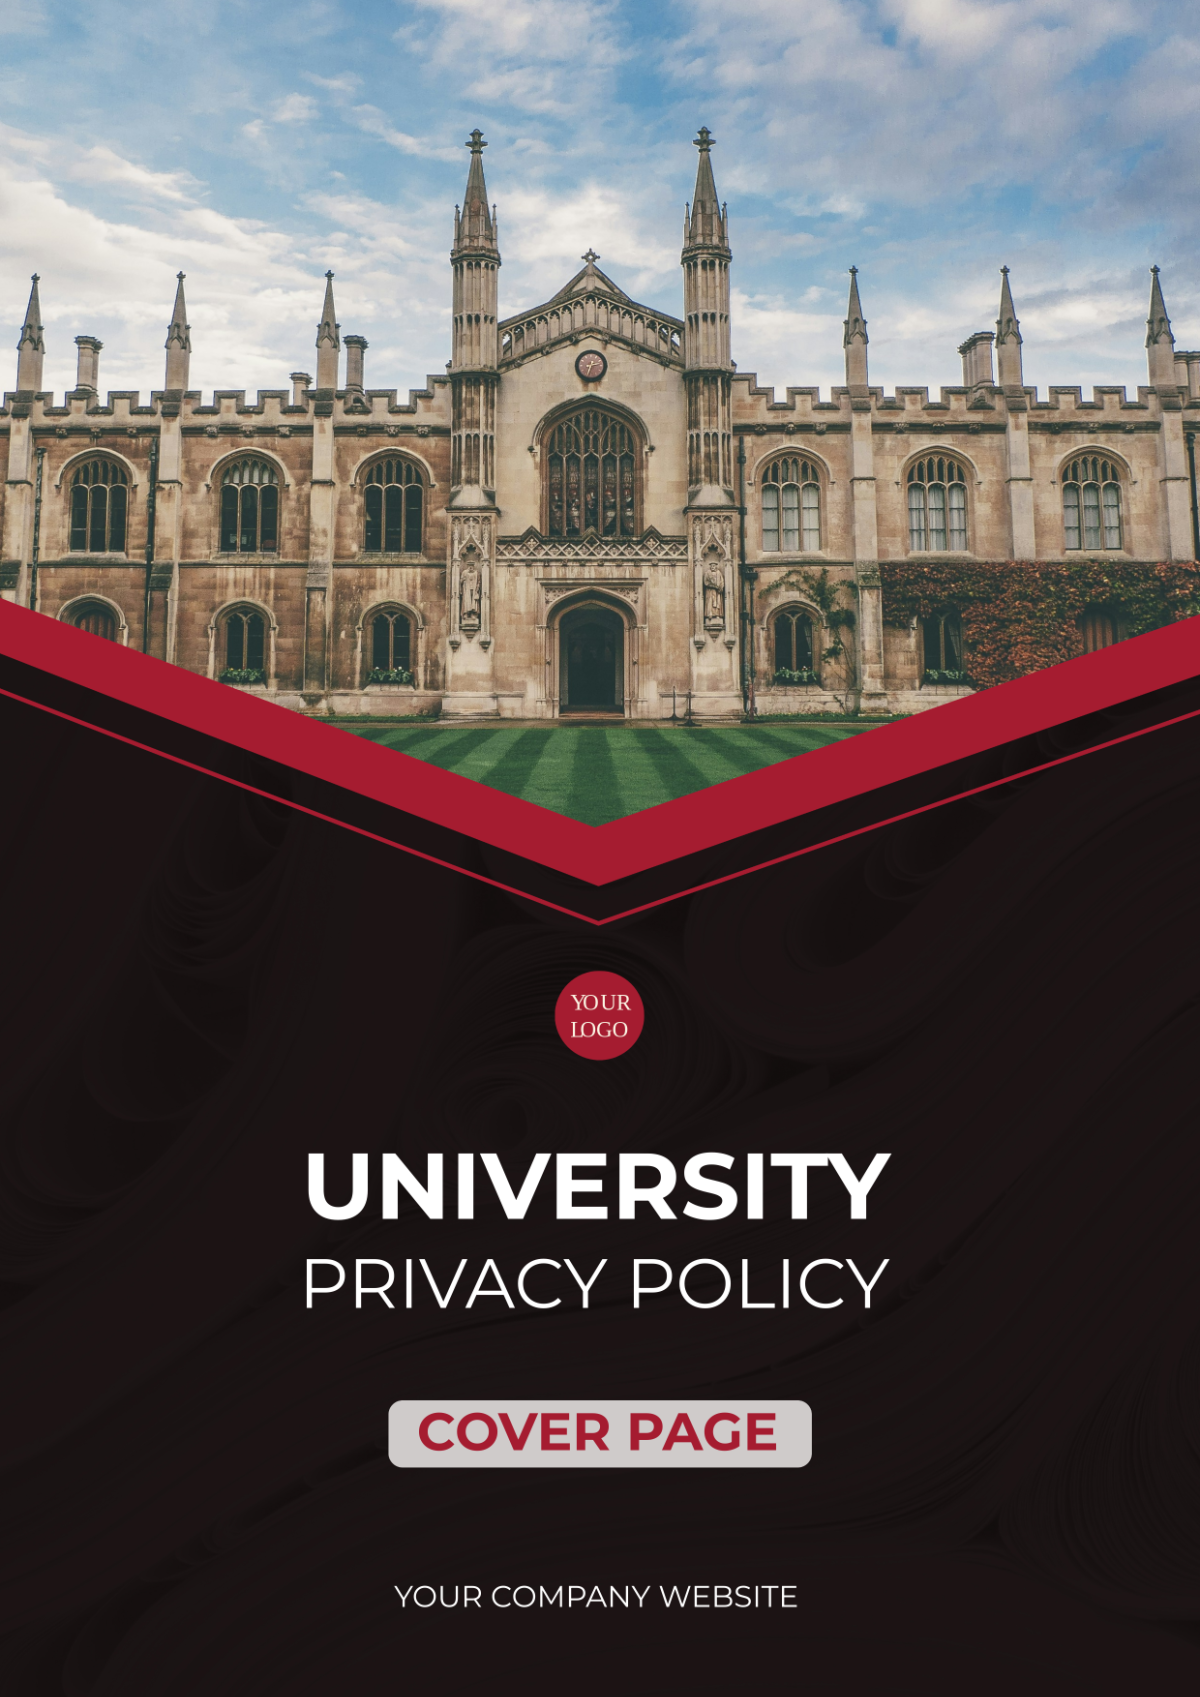 University Privacy Policy Cover Page